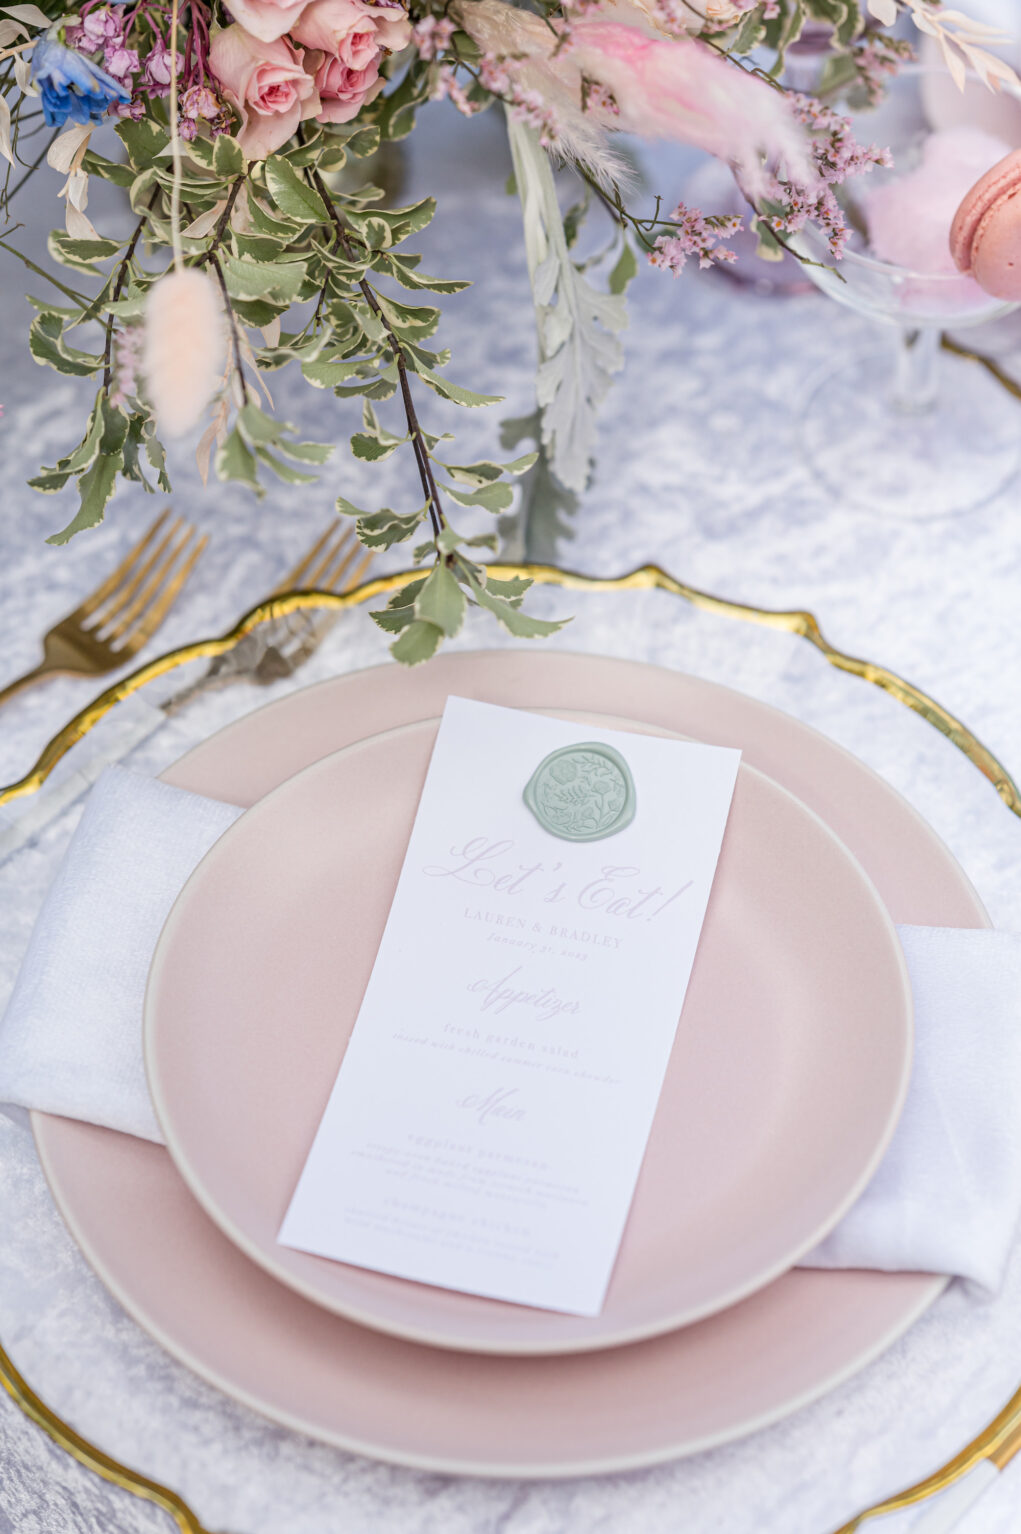 Spring Let's Eat Menu Card for Wedding Reception Inspiration with Blush Pink Plates